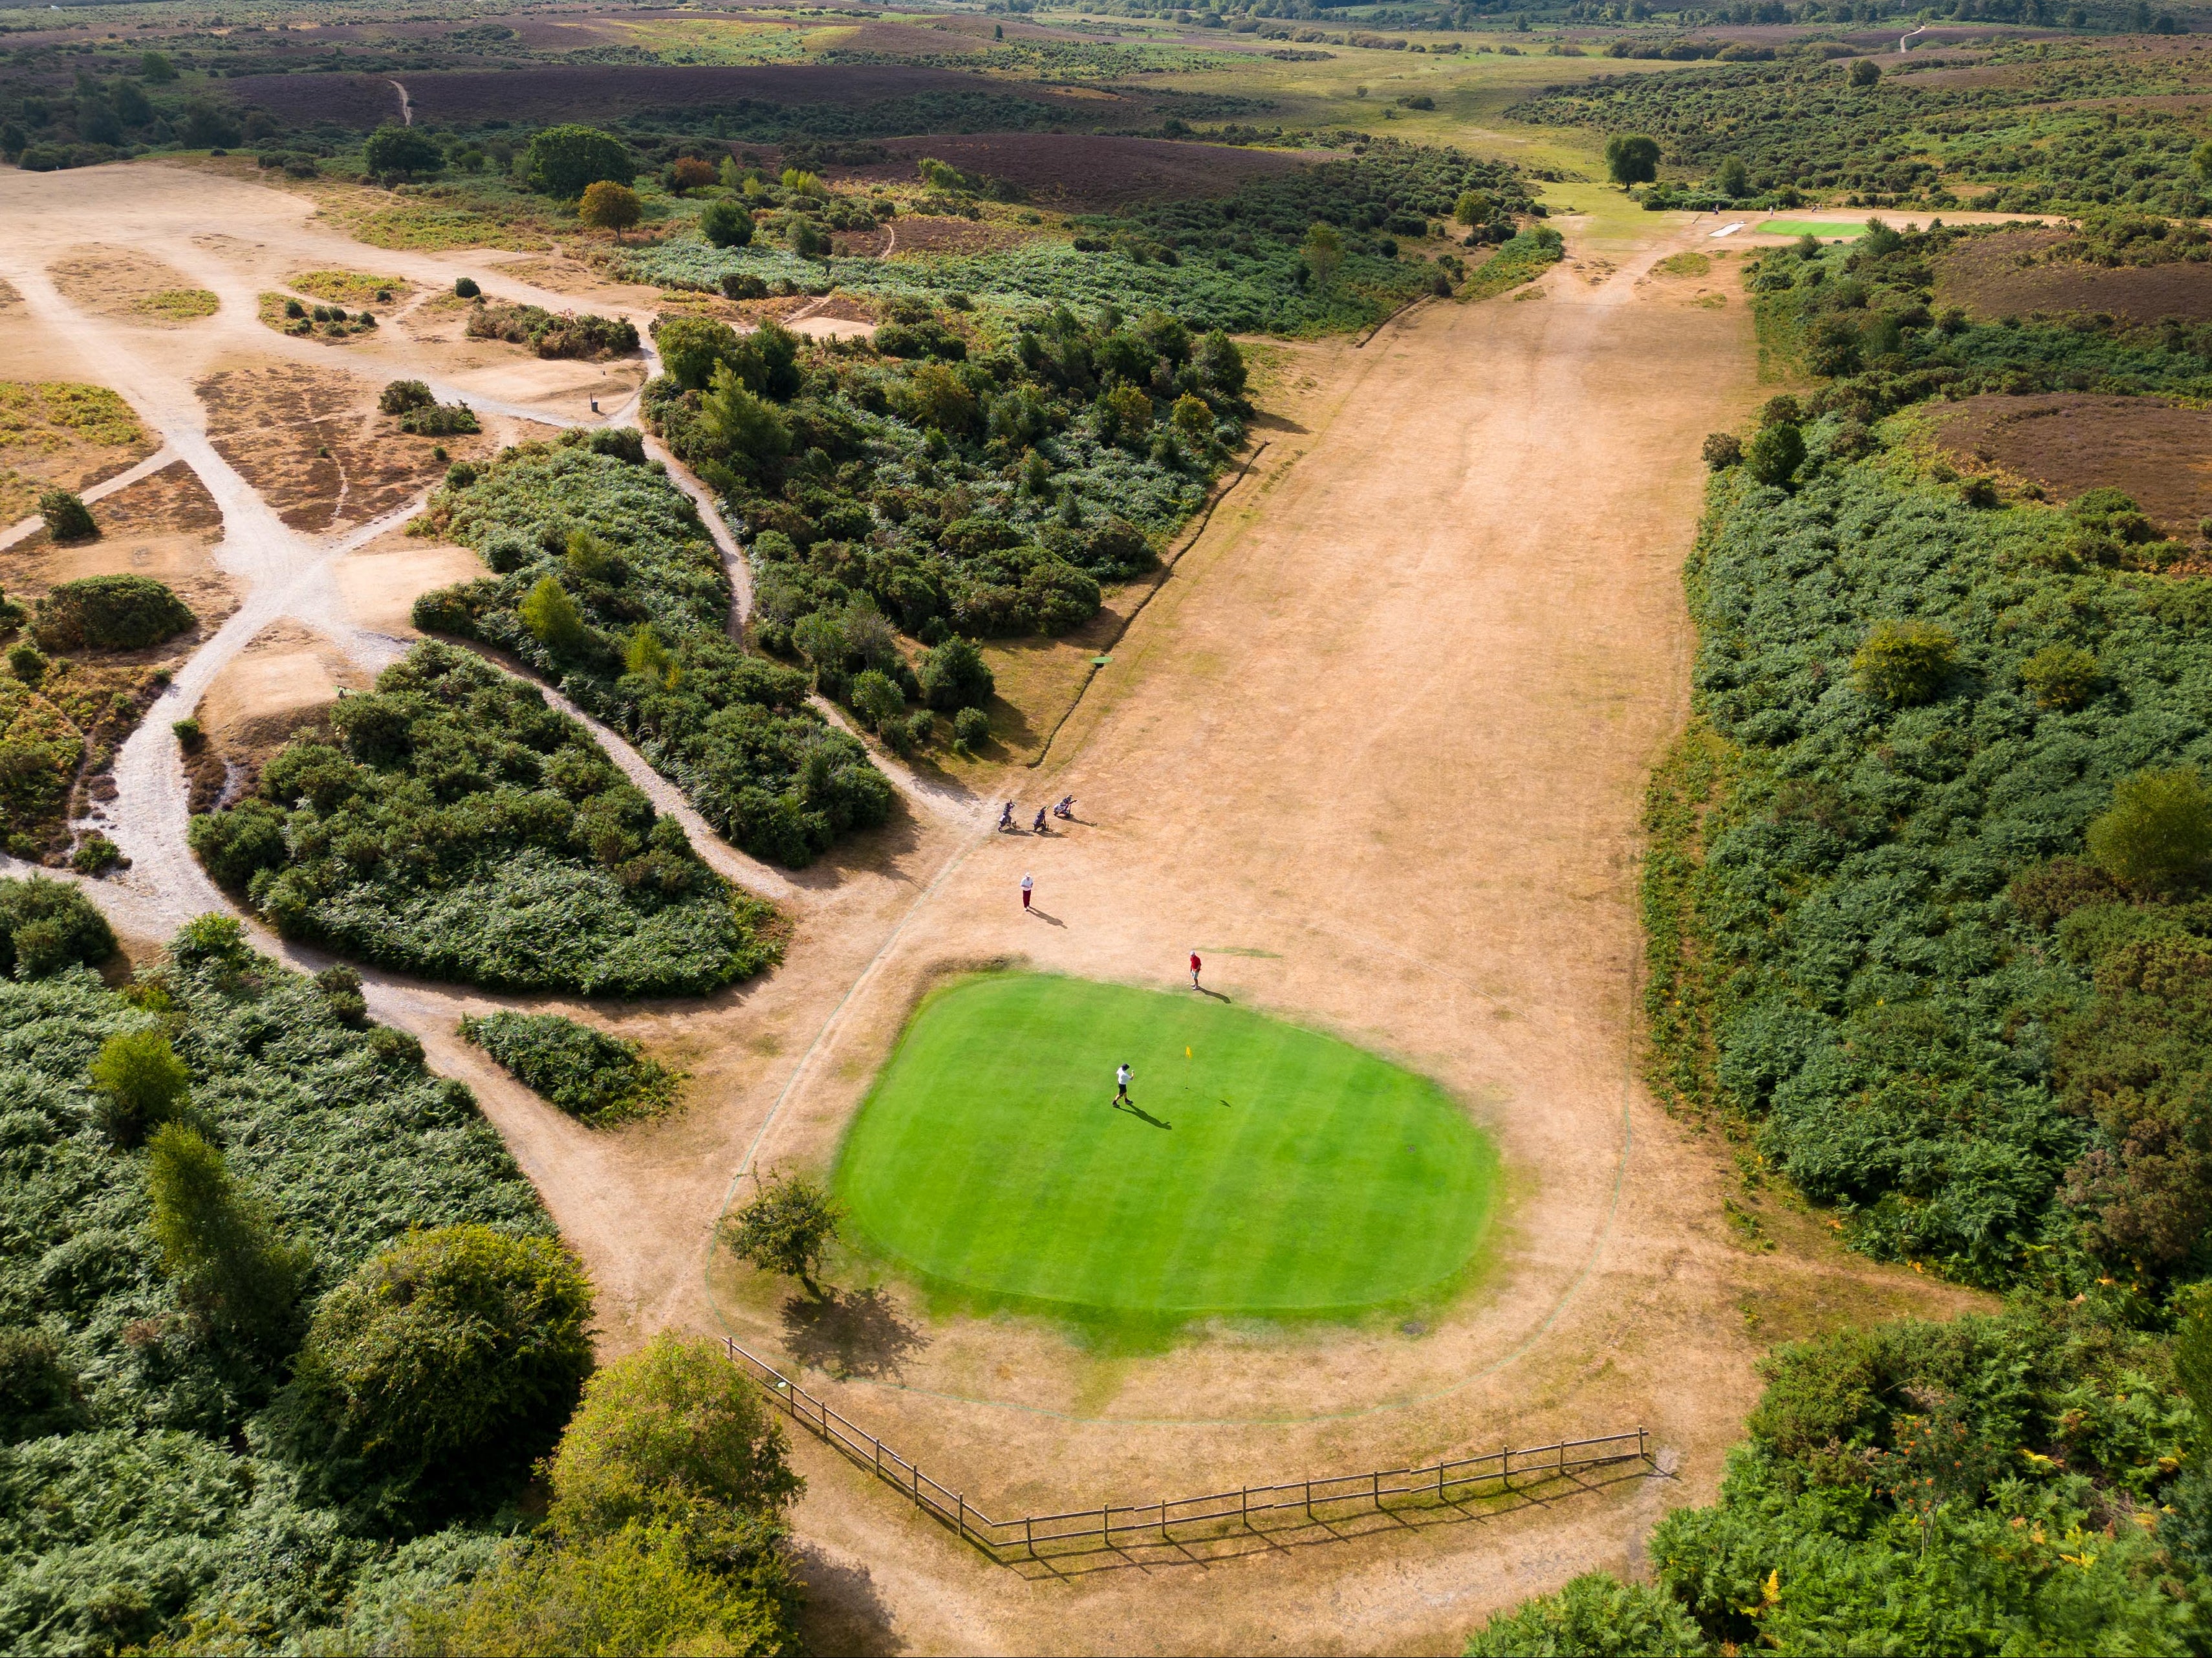 Aerial view of the parched grass at the Burley Golf Club in the New Forest this month